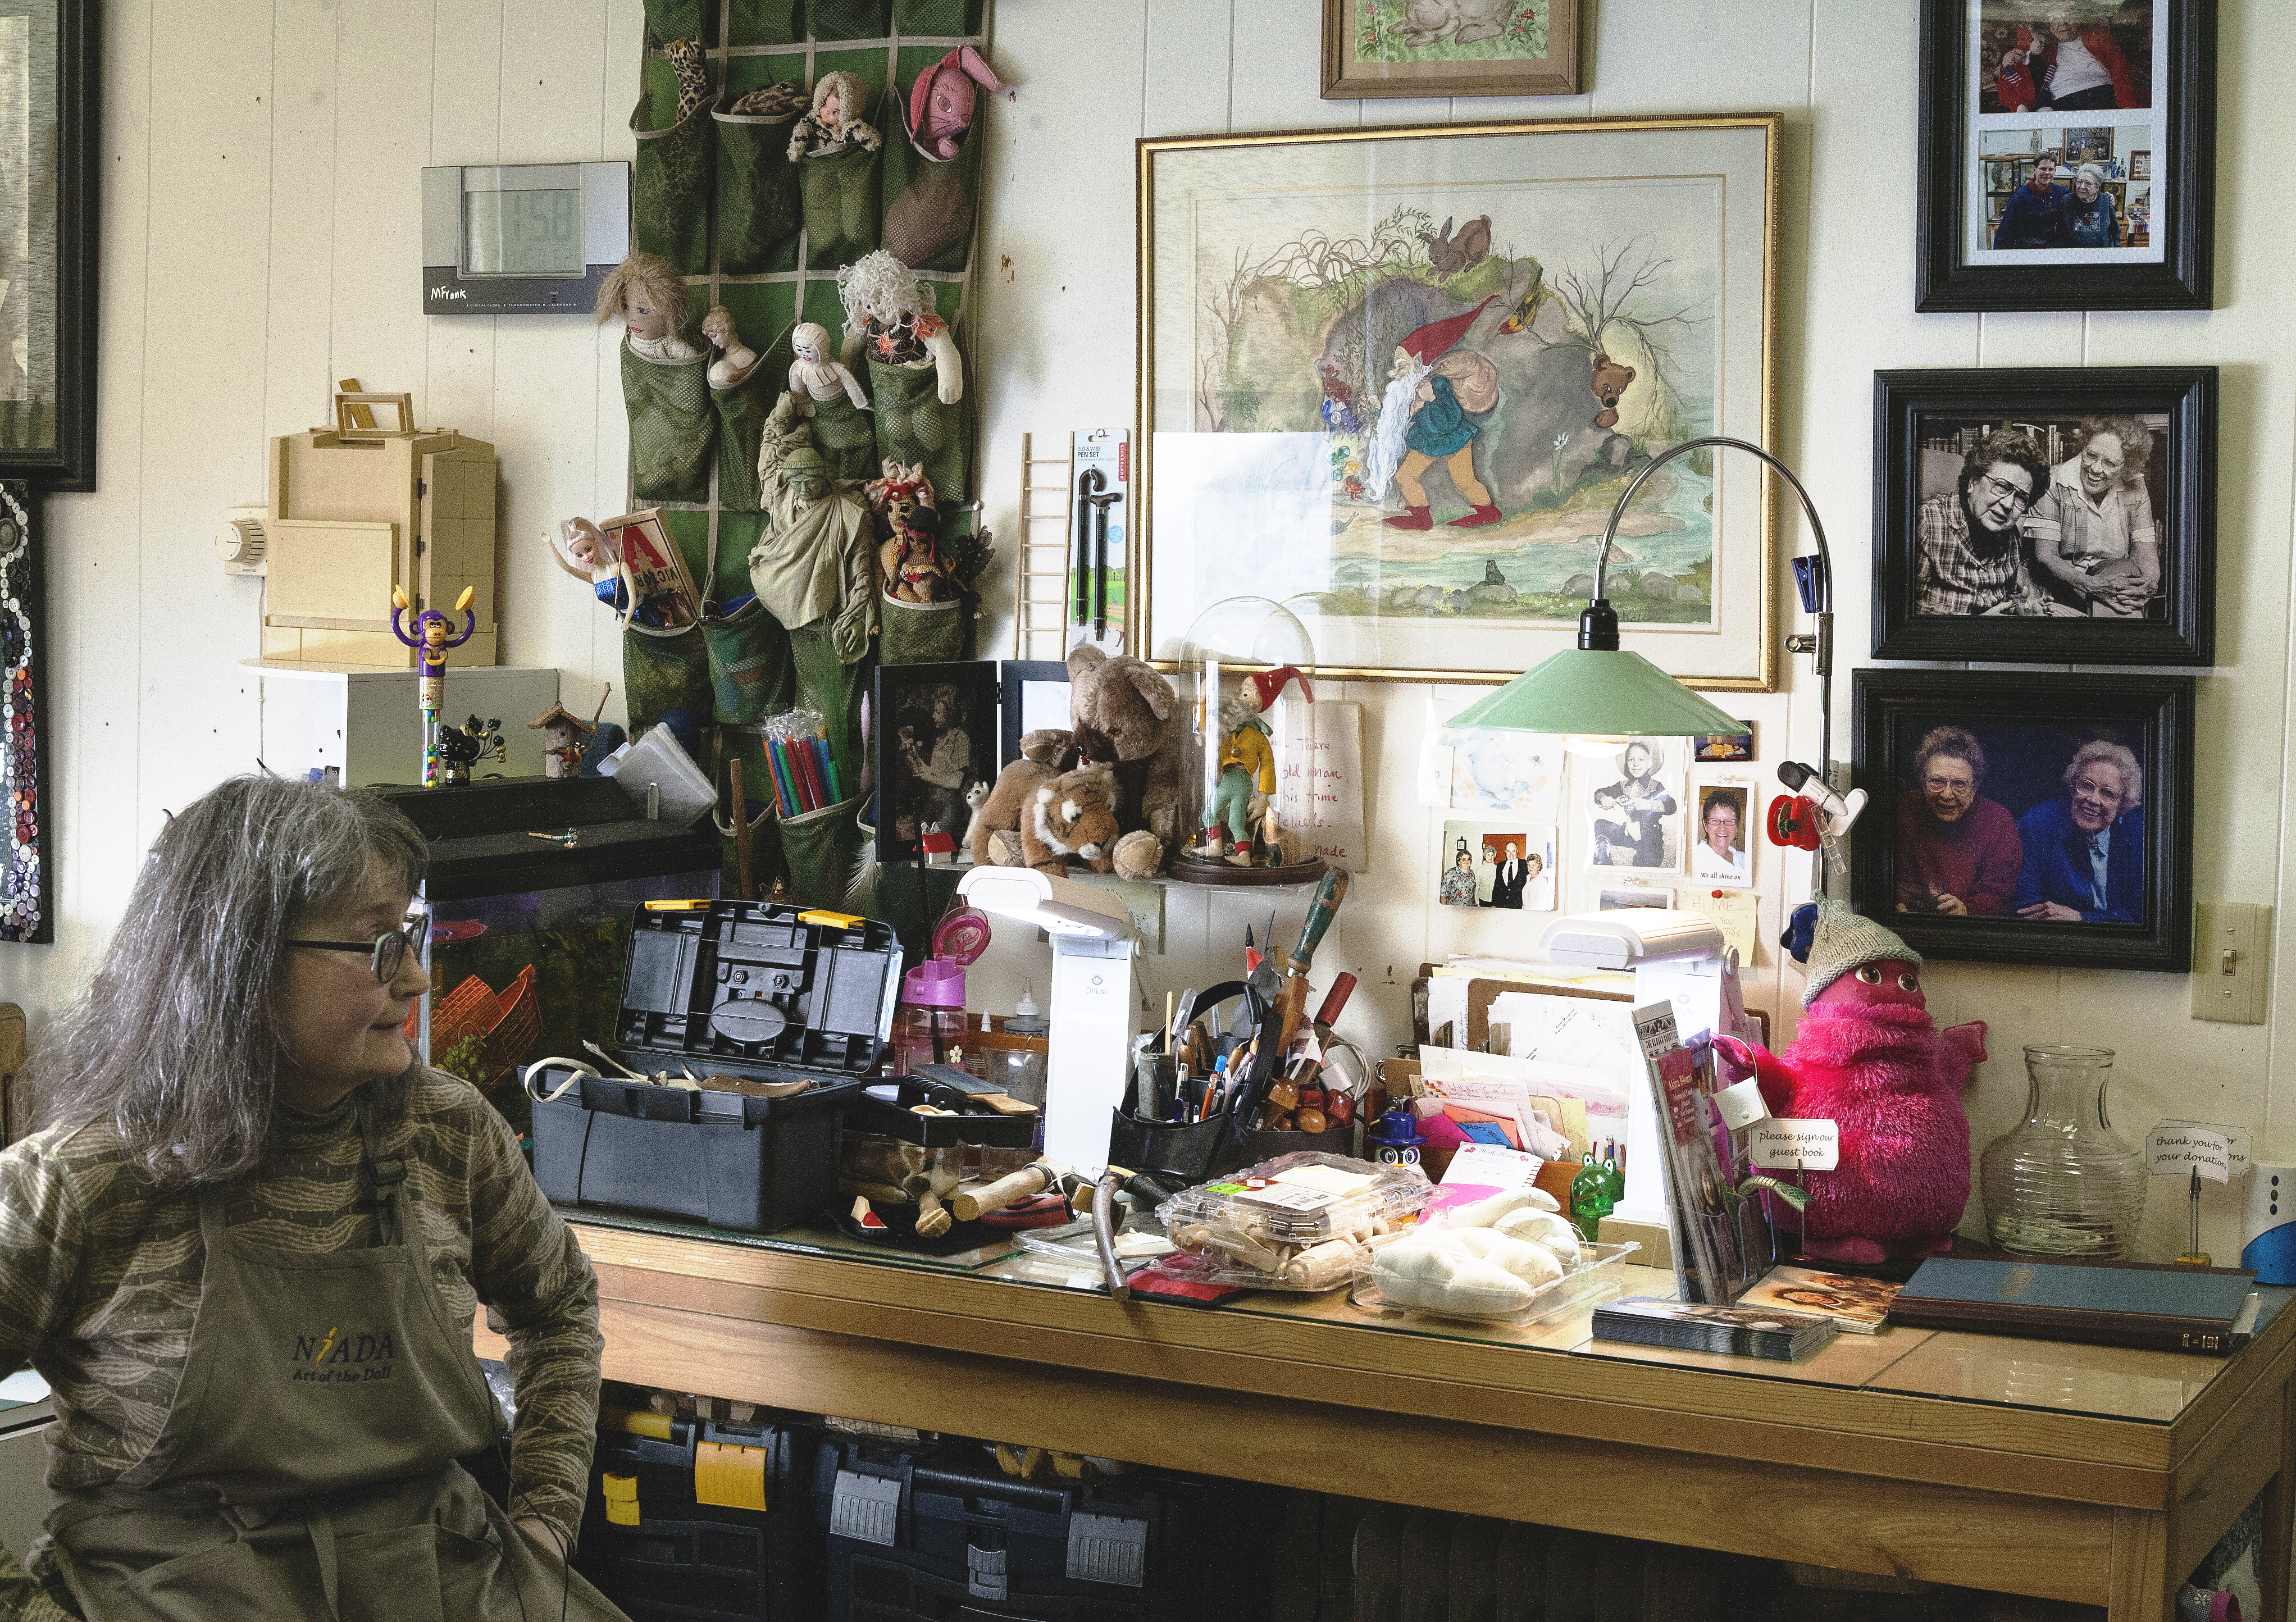 Mary Ellen Frank shows off her studio and work space at Aunt Claudia's Dolls museum in downtown Juneau. Frank creates custom dolls and owns an extensive collection of Alaskan Native doll art. (Photo by Tripp J Crouse/KTOO)